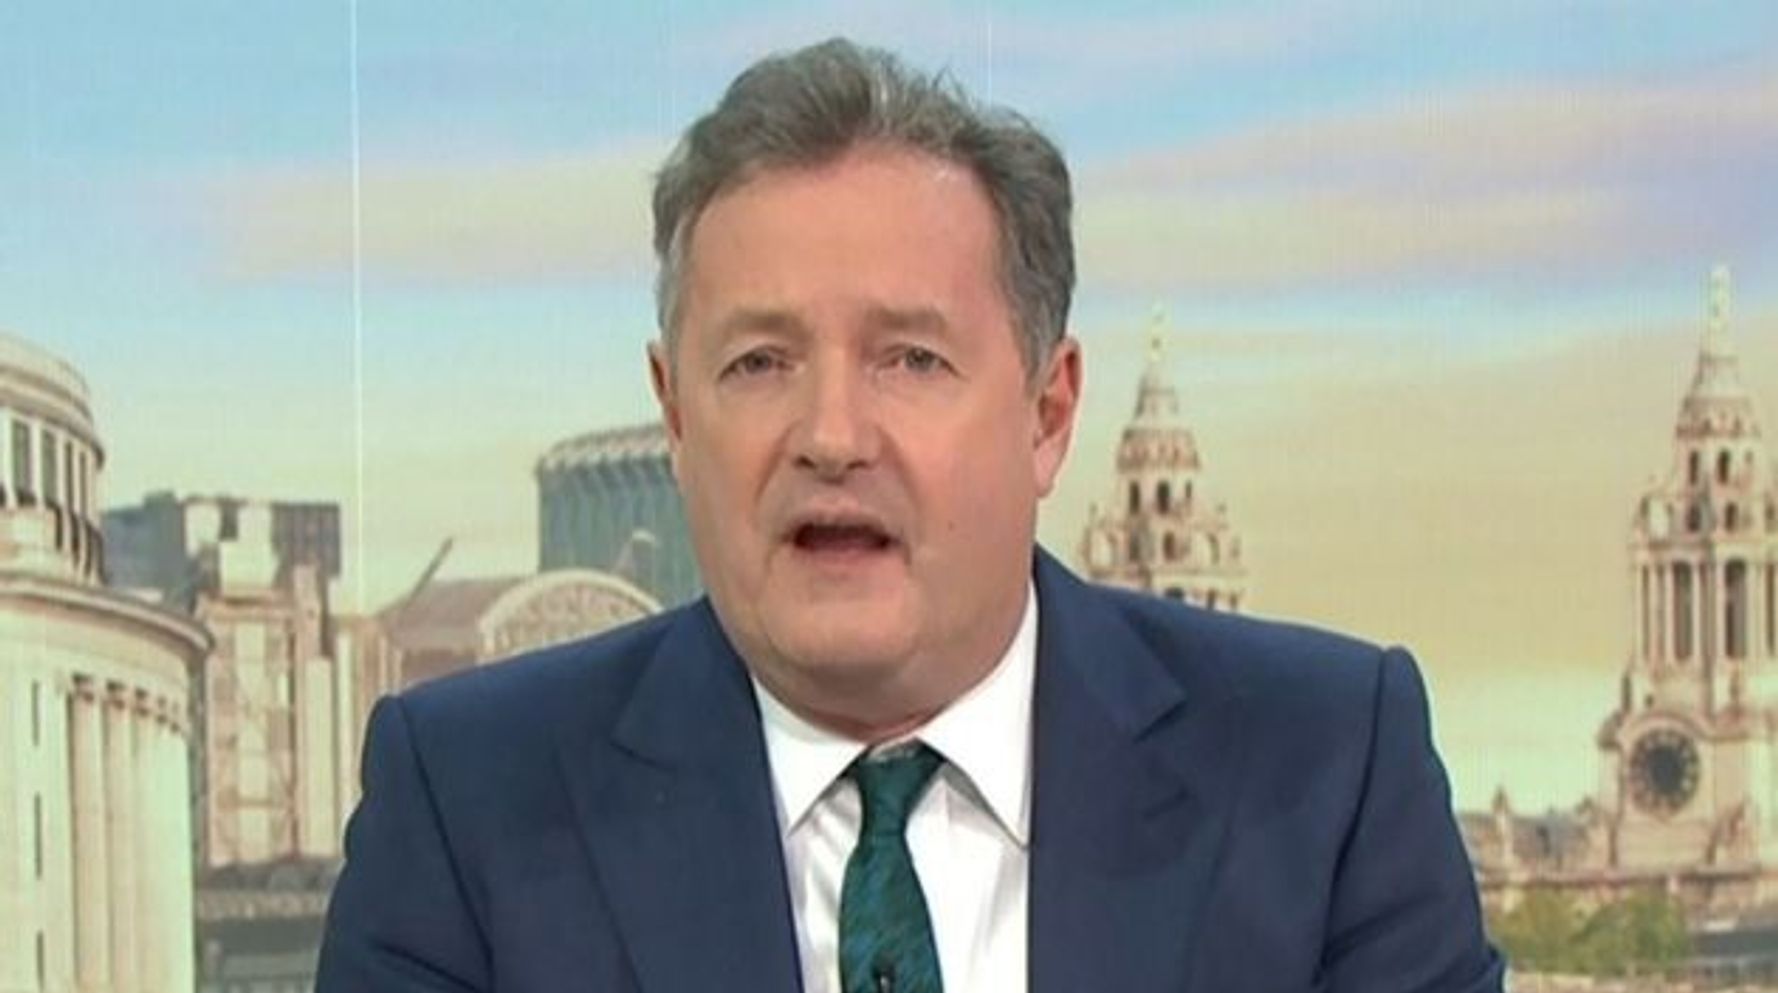 Piers Morgan leaves Good Morning Britain after Meghan Markle’s controversial remarks